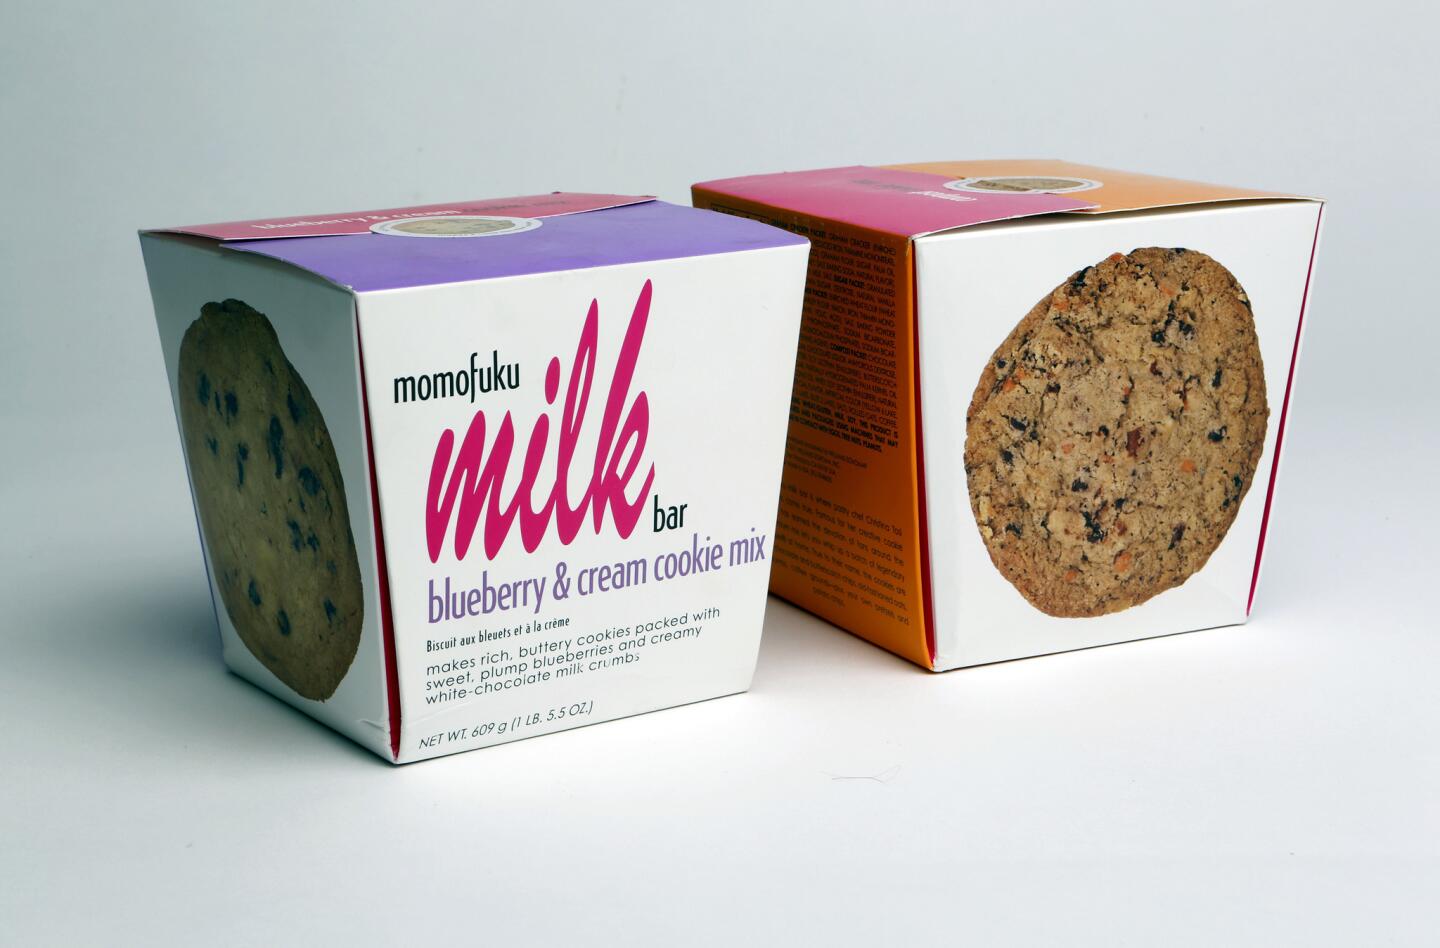 Momofuku milk bar, blueberry and cream cookie mix, left, and compost cookie mix, right.